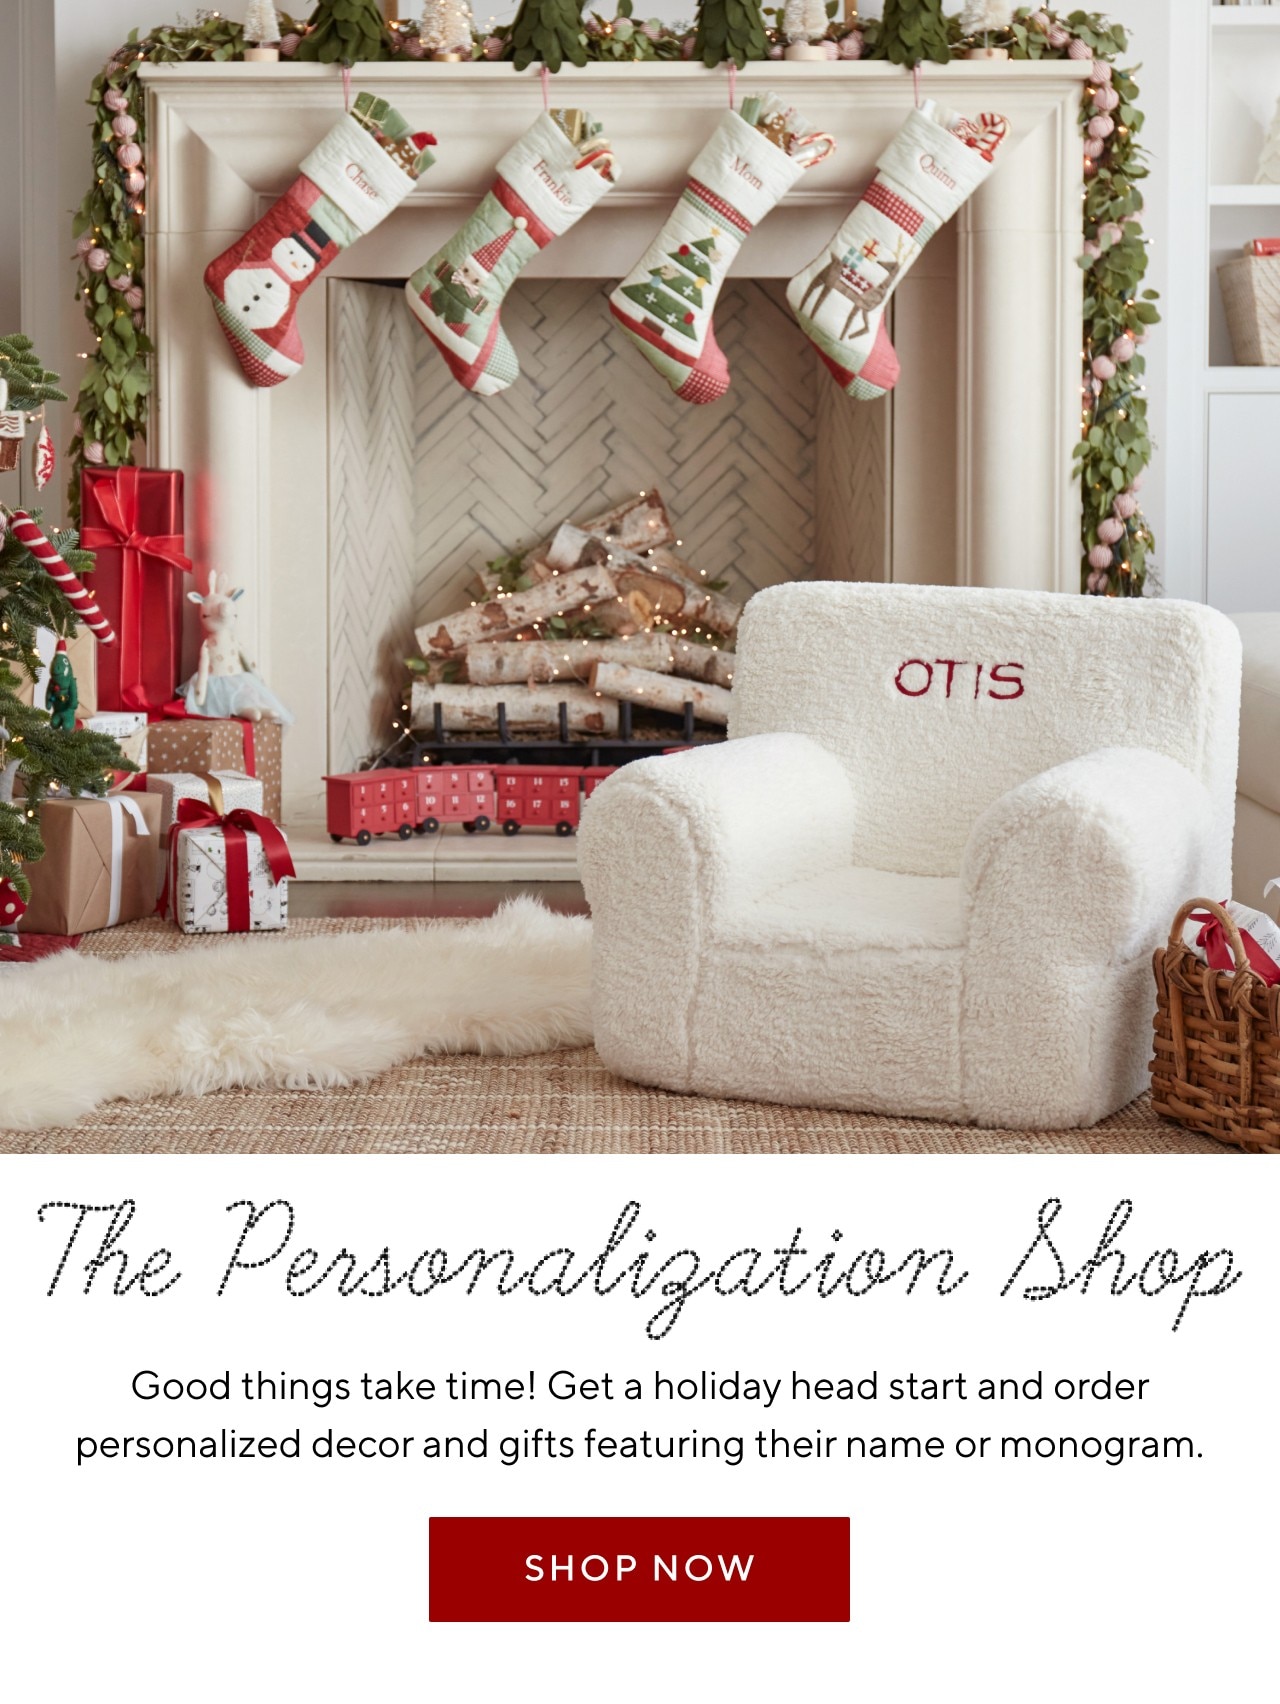 THE PERSONALIZATION SHOP